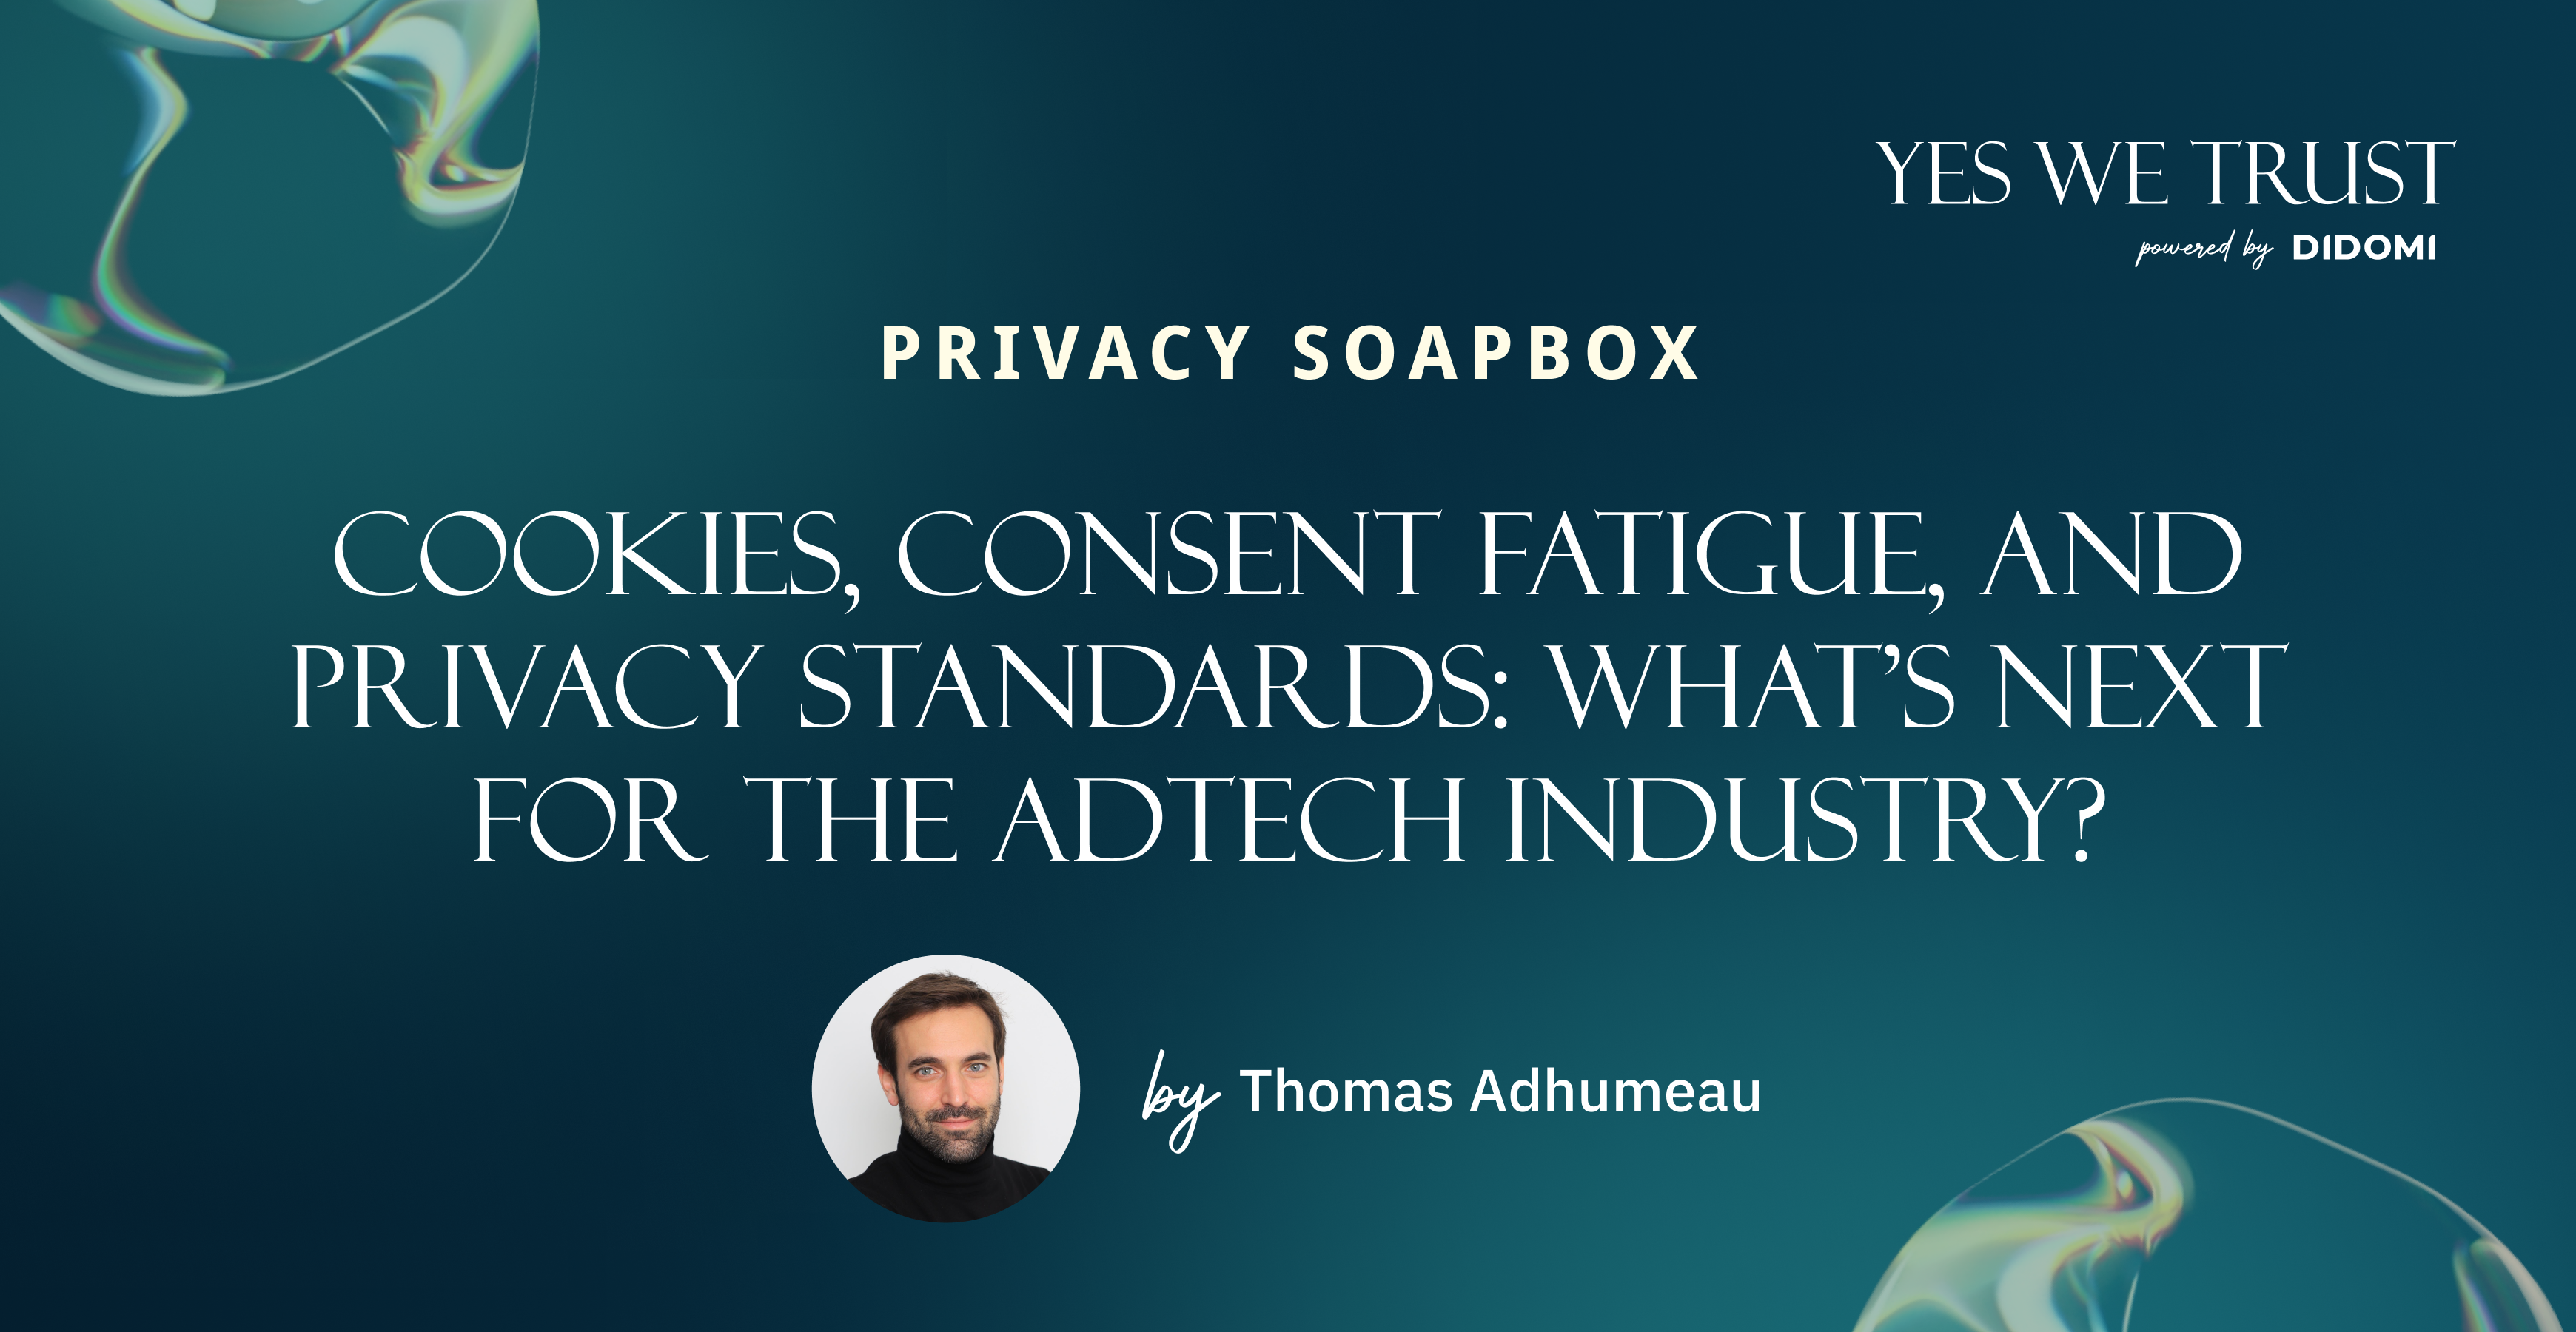 Cookies, consent fatigue, and privacy standards: What's next for the AdTech industry?